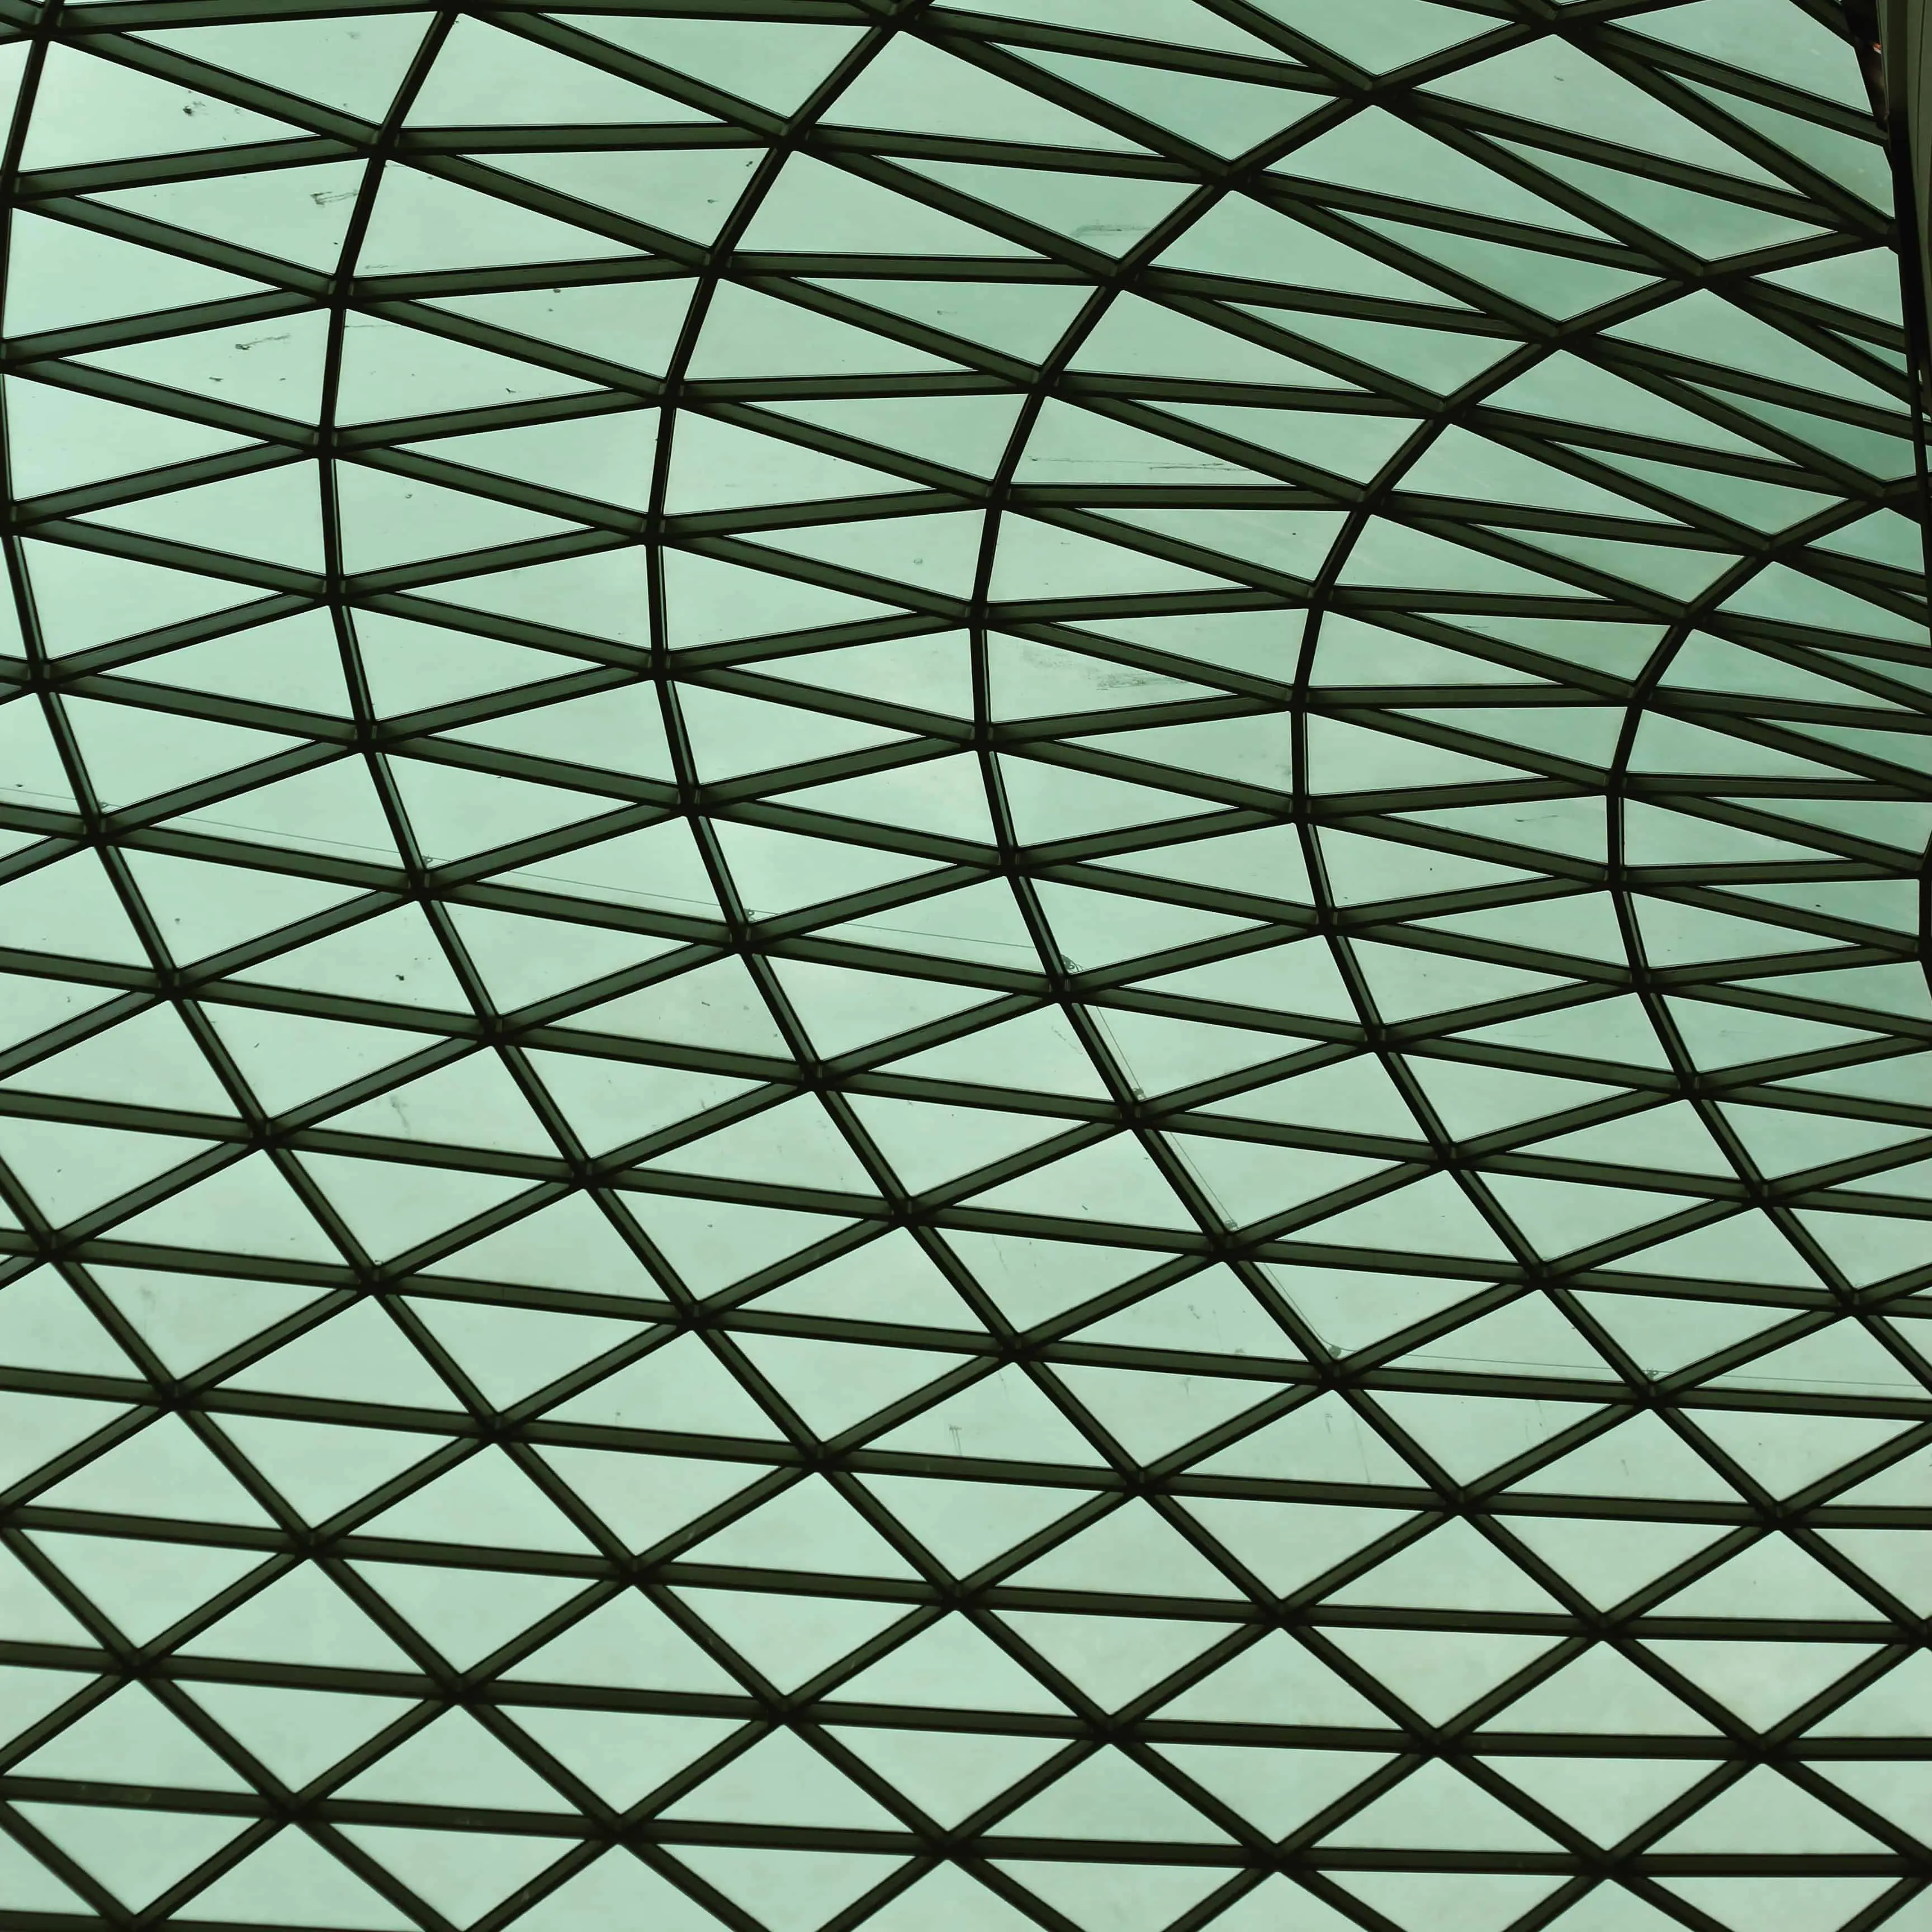 Roof of the British Museum